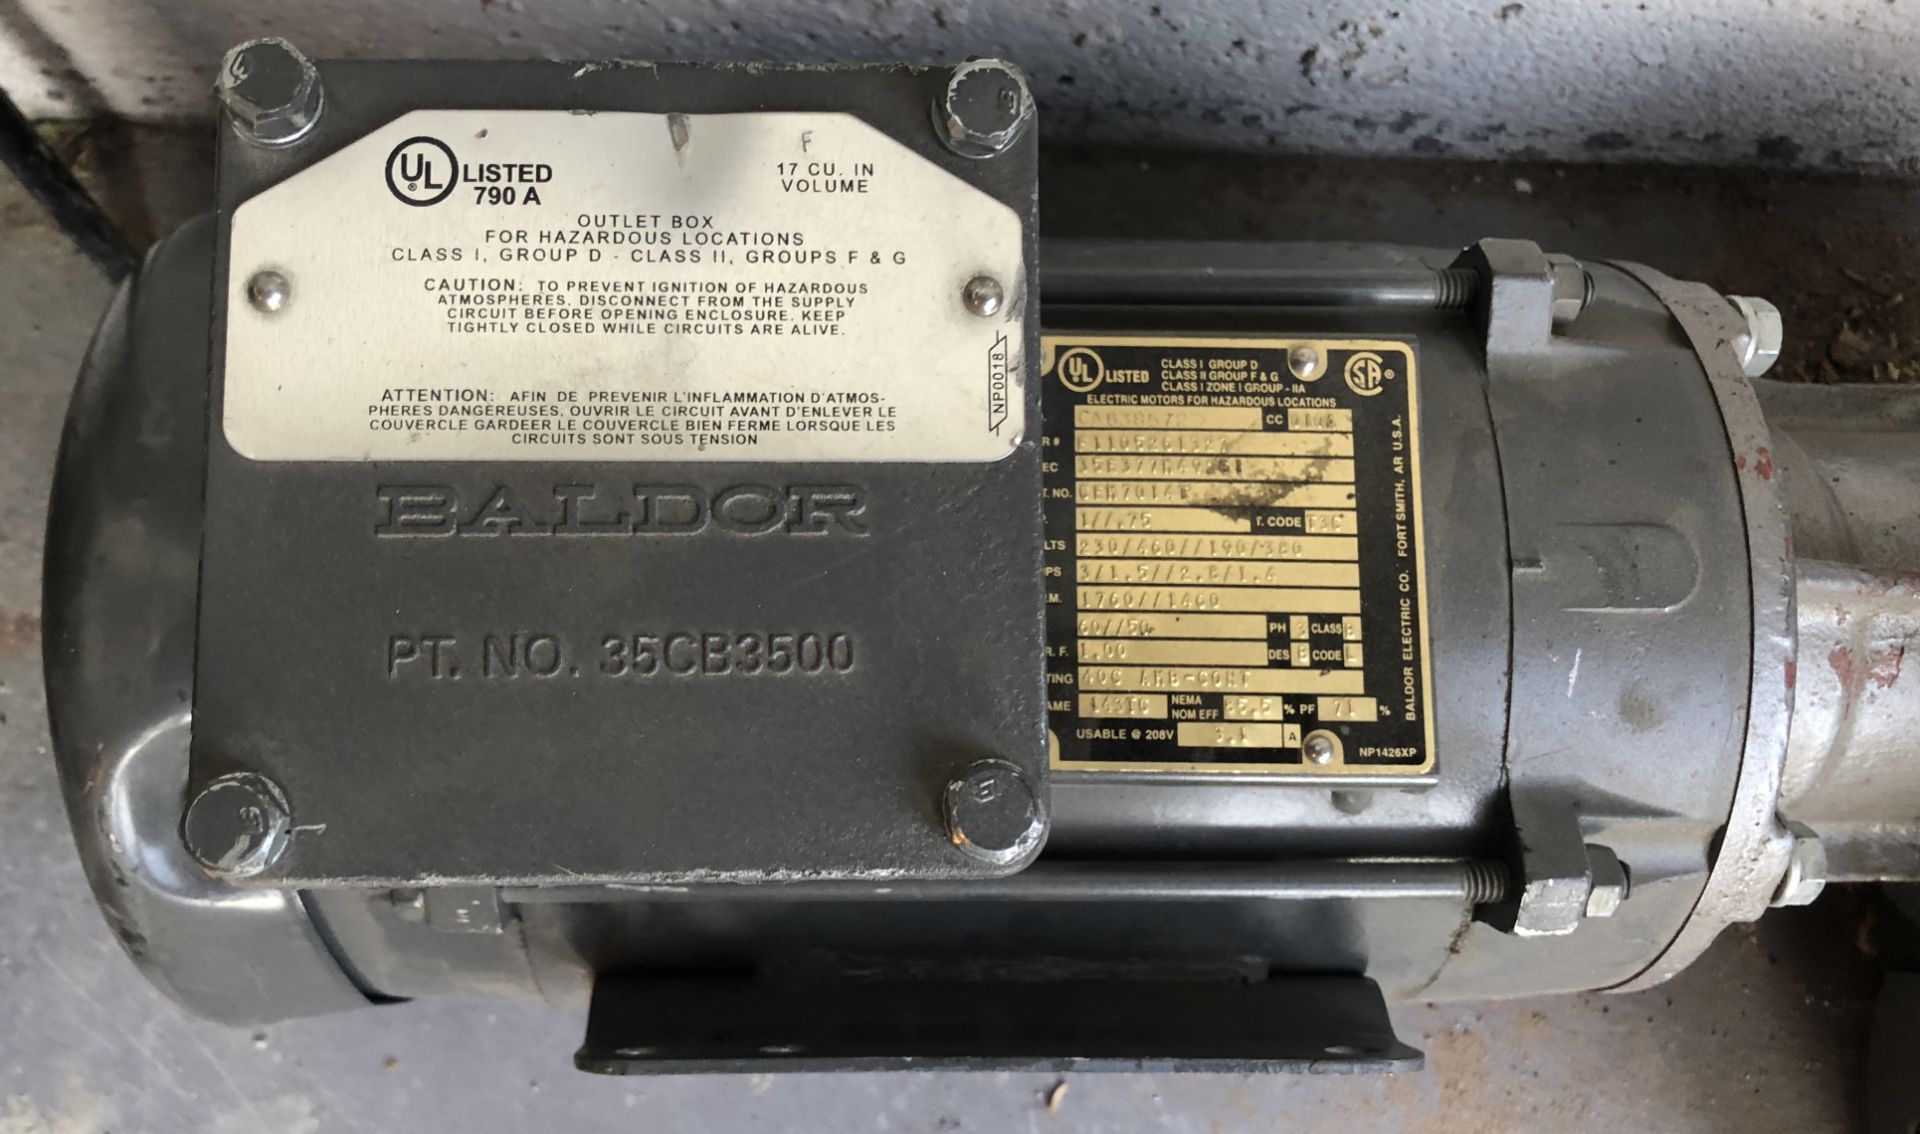 BRAND NEW BALDOR MOTOR WITH GEAR BOX ATTACHED PT NO. 35CB3500 COMBO UNIT $2000 RETAIL - Image 2 of 4